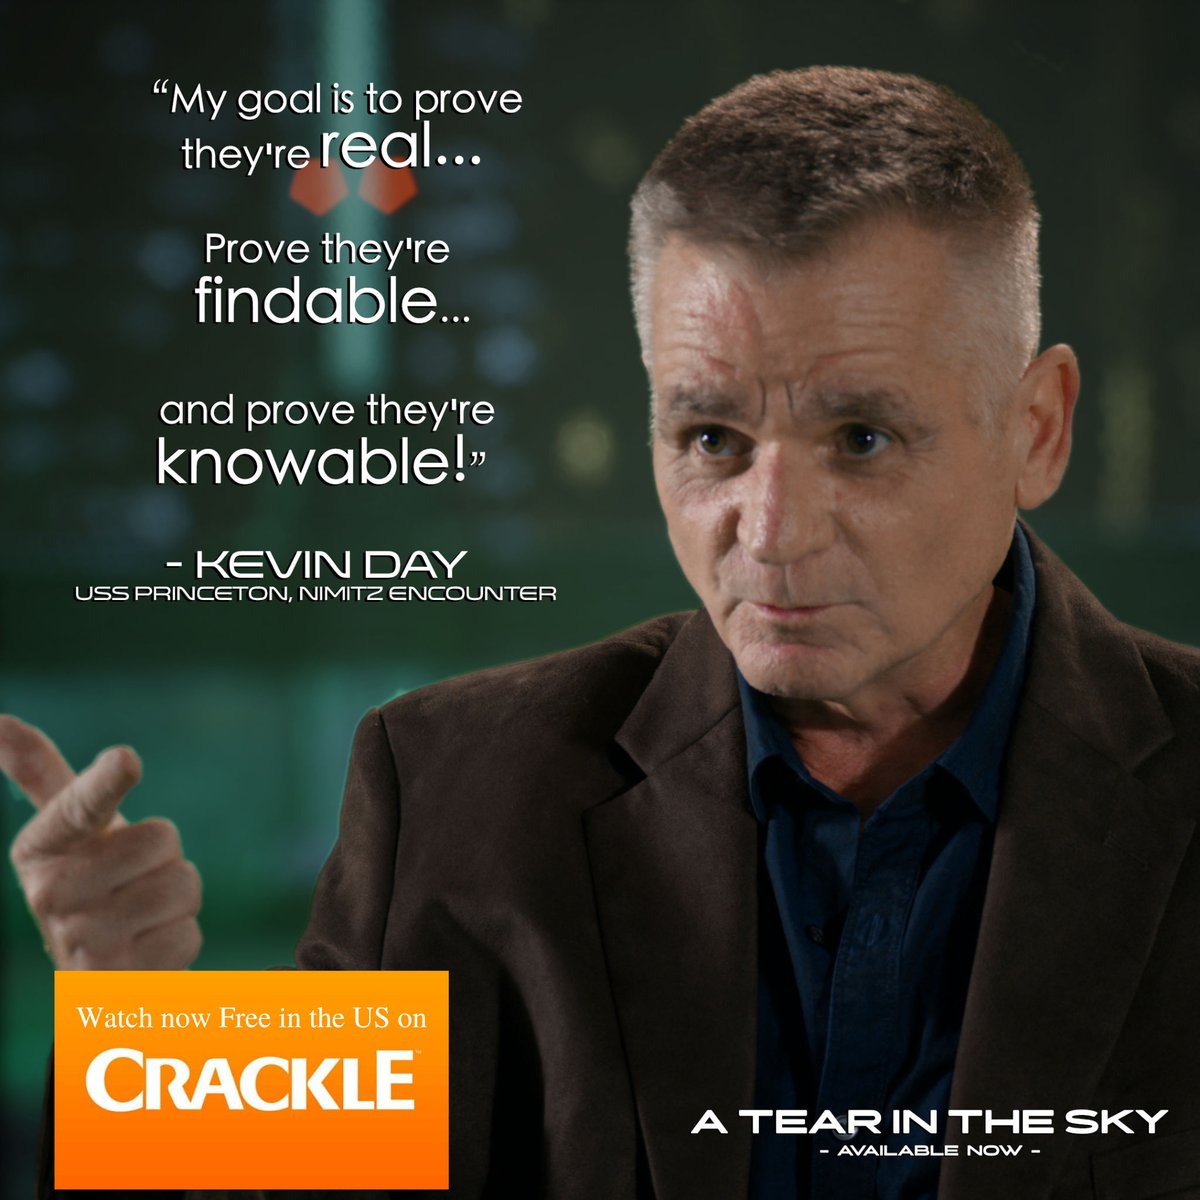 test Twitter Media - A Tear In The Sky Now FREE to stream on Crackle in the US https://t.co/PN6MF2Yttg
#uaptwitter #ufotwitter #freetostream #crackle #williamshatner #carolinecory #wormhole #film https://t.co/vYuKdEeByV